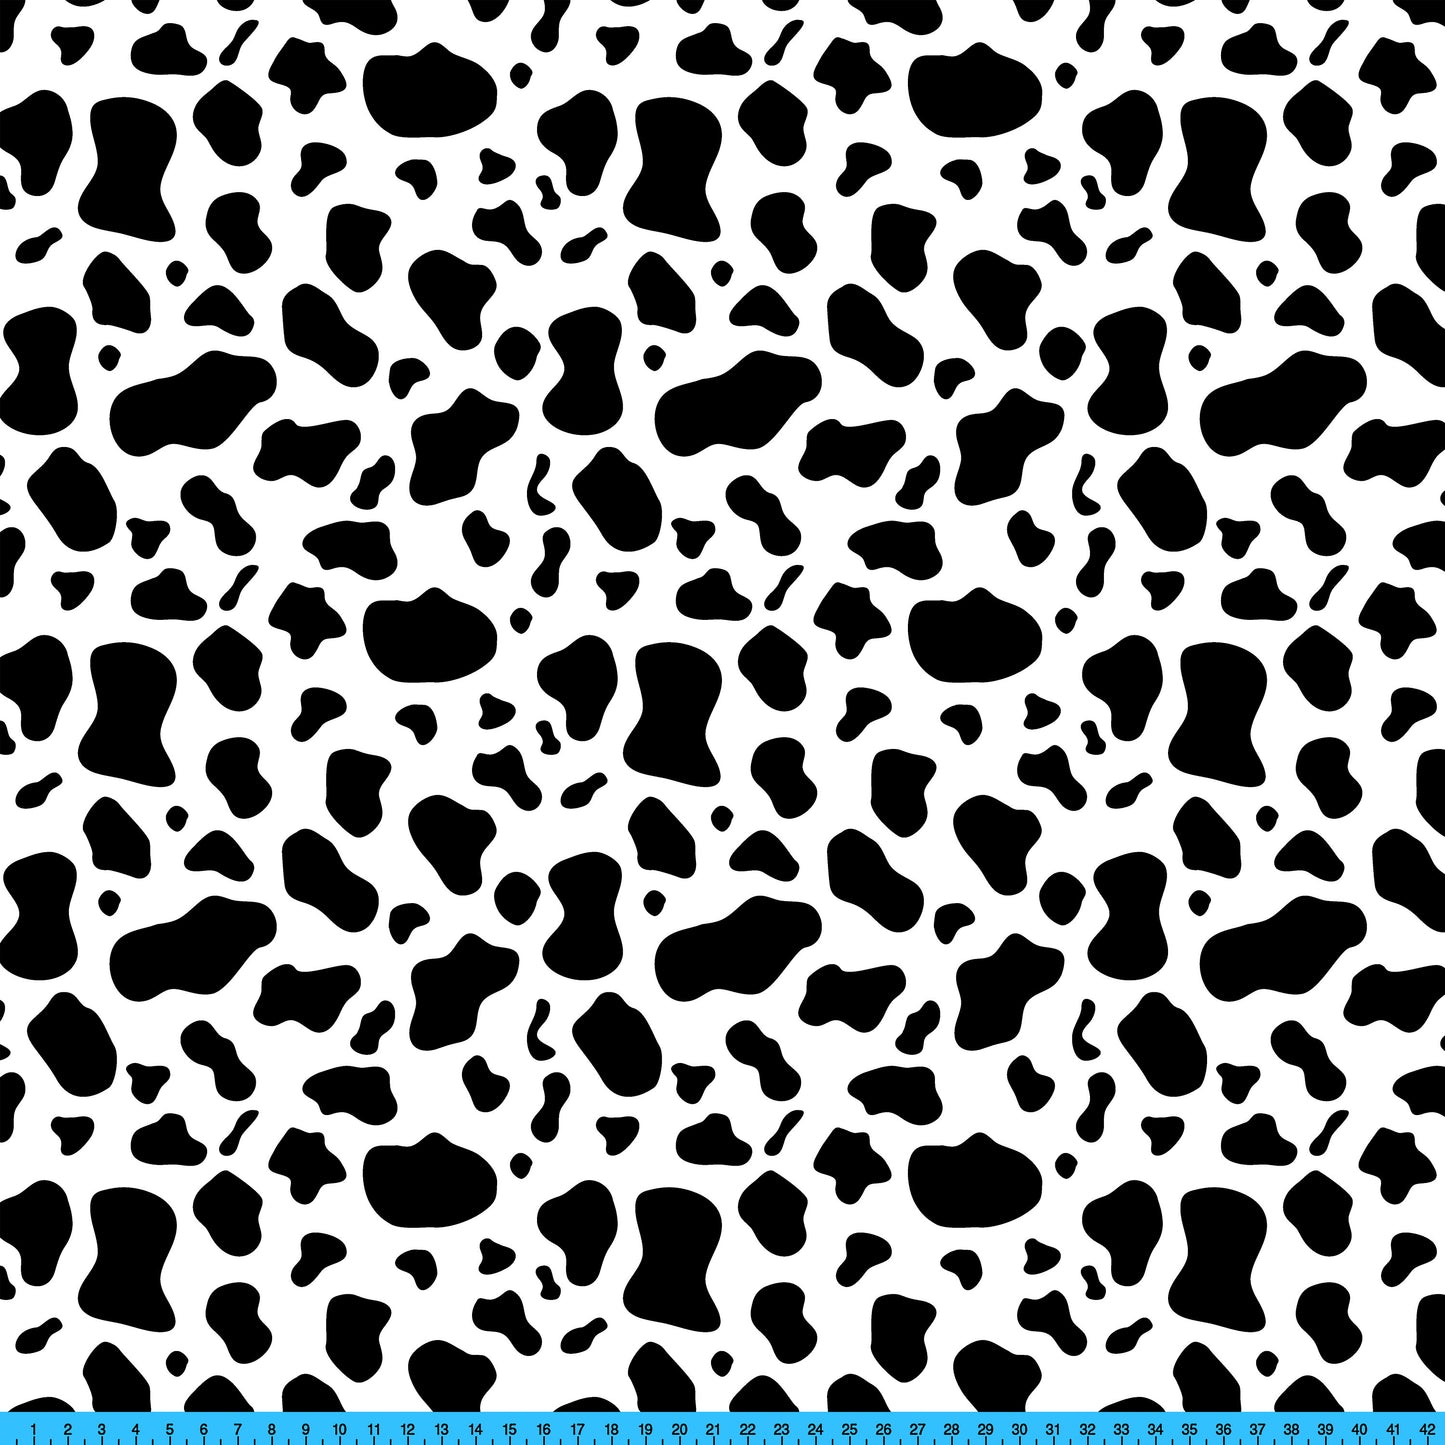 Cow Print Fabric Pattern Printed Fabric By The Yard